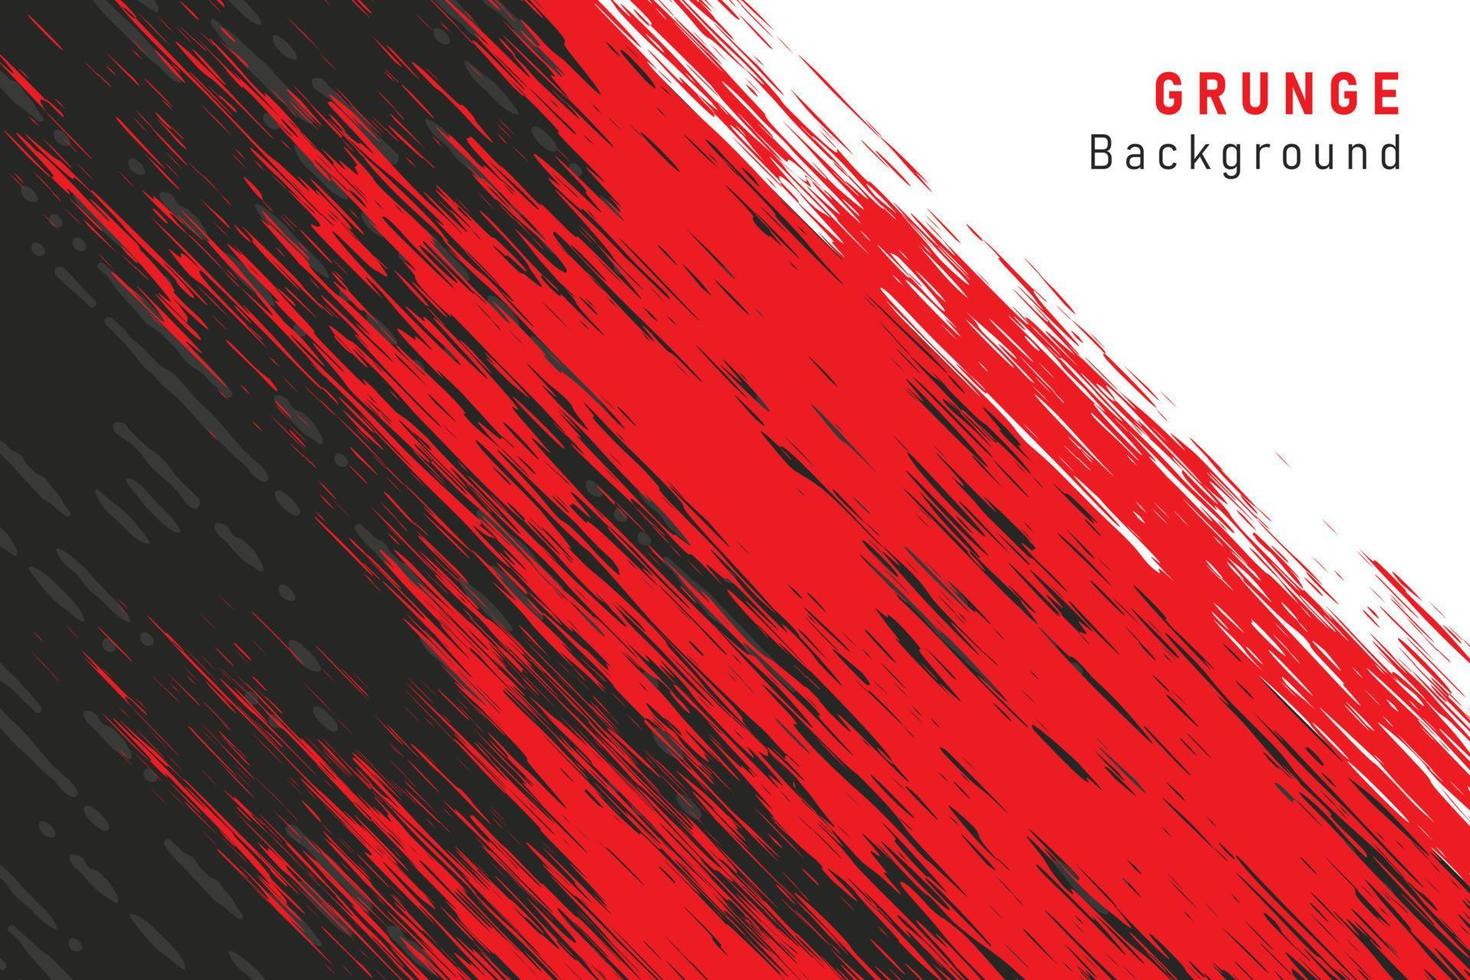 black white and red grunge texture background vector